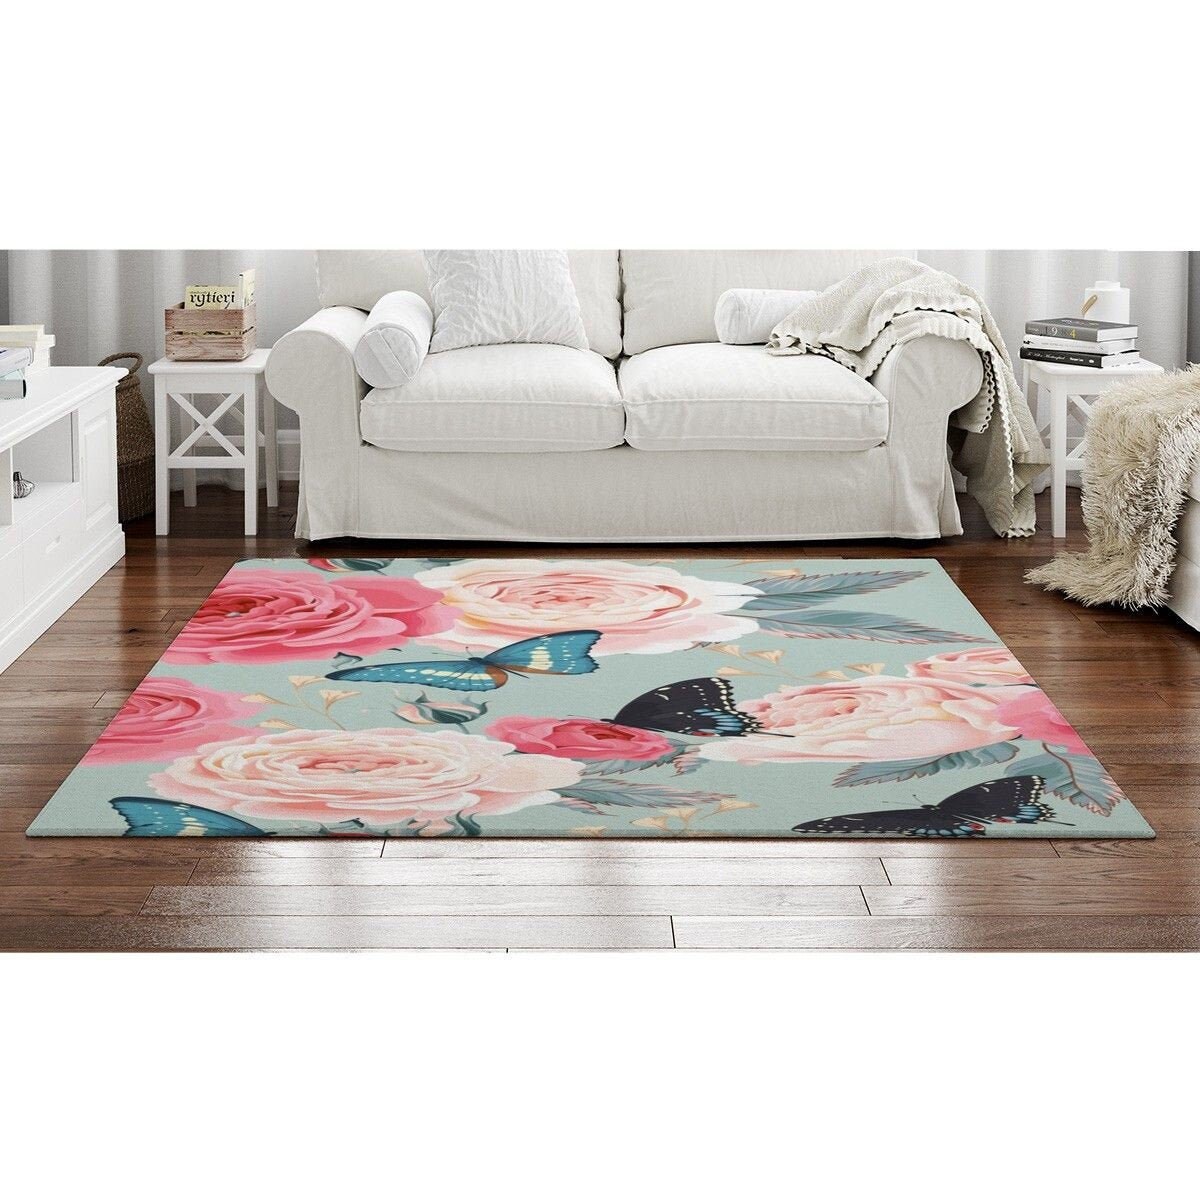  Beach Rug 3x4 Area Rug Seashell Rugs for Entryway Bedroom  Living Room, Washable Non-Slip Soft Low Pile Small Rug Indoor Door Mat,  Dorm Dining Room Nursery Home Decor Carpet : Home